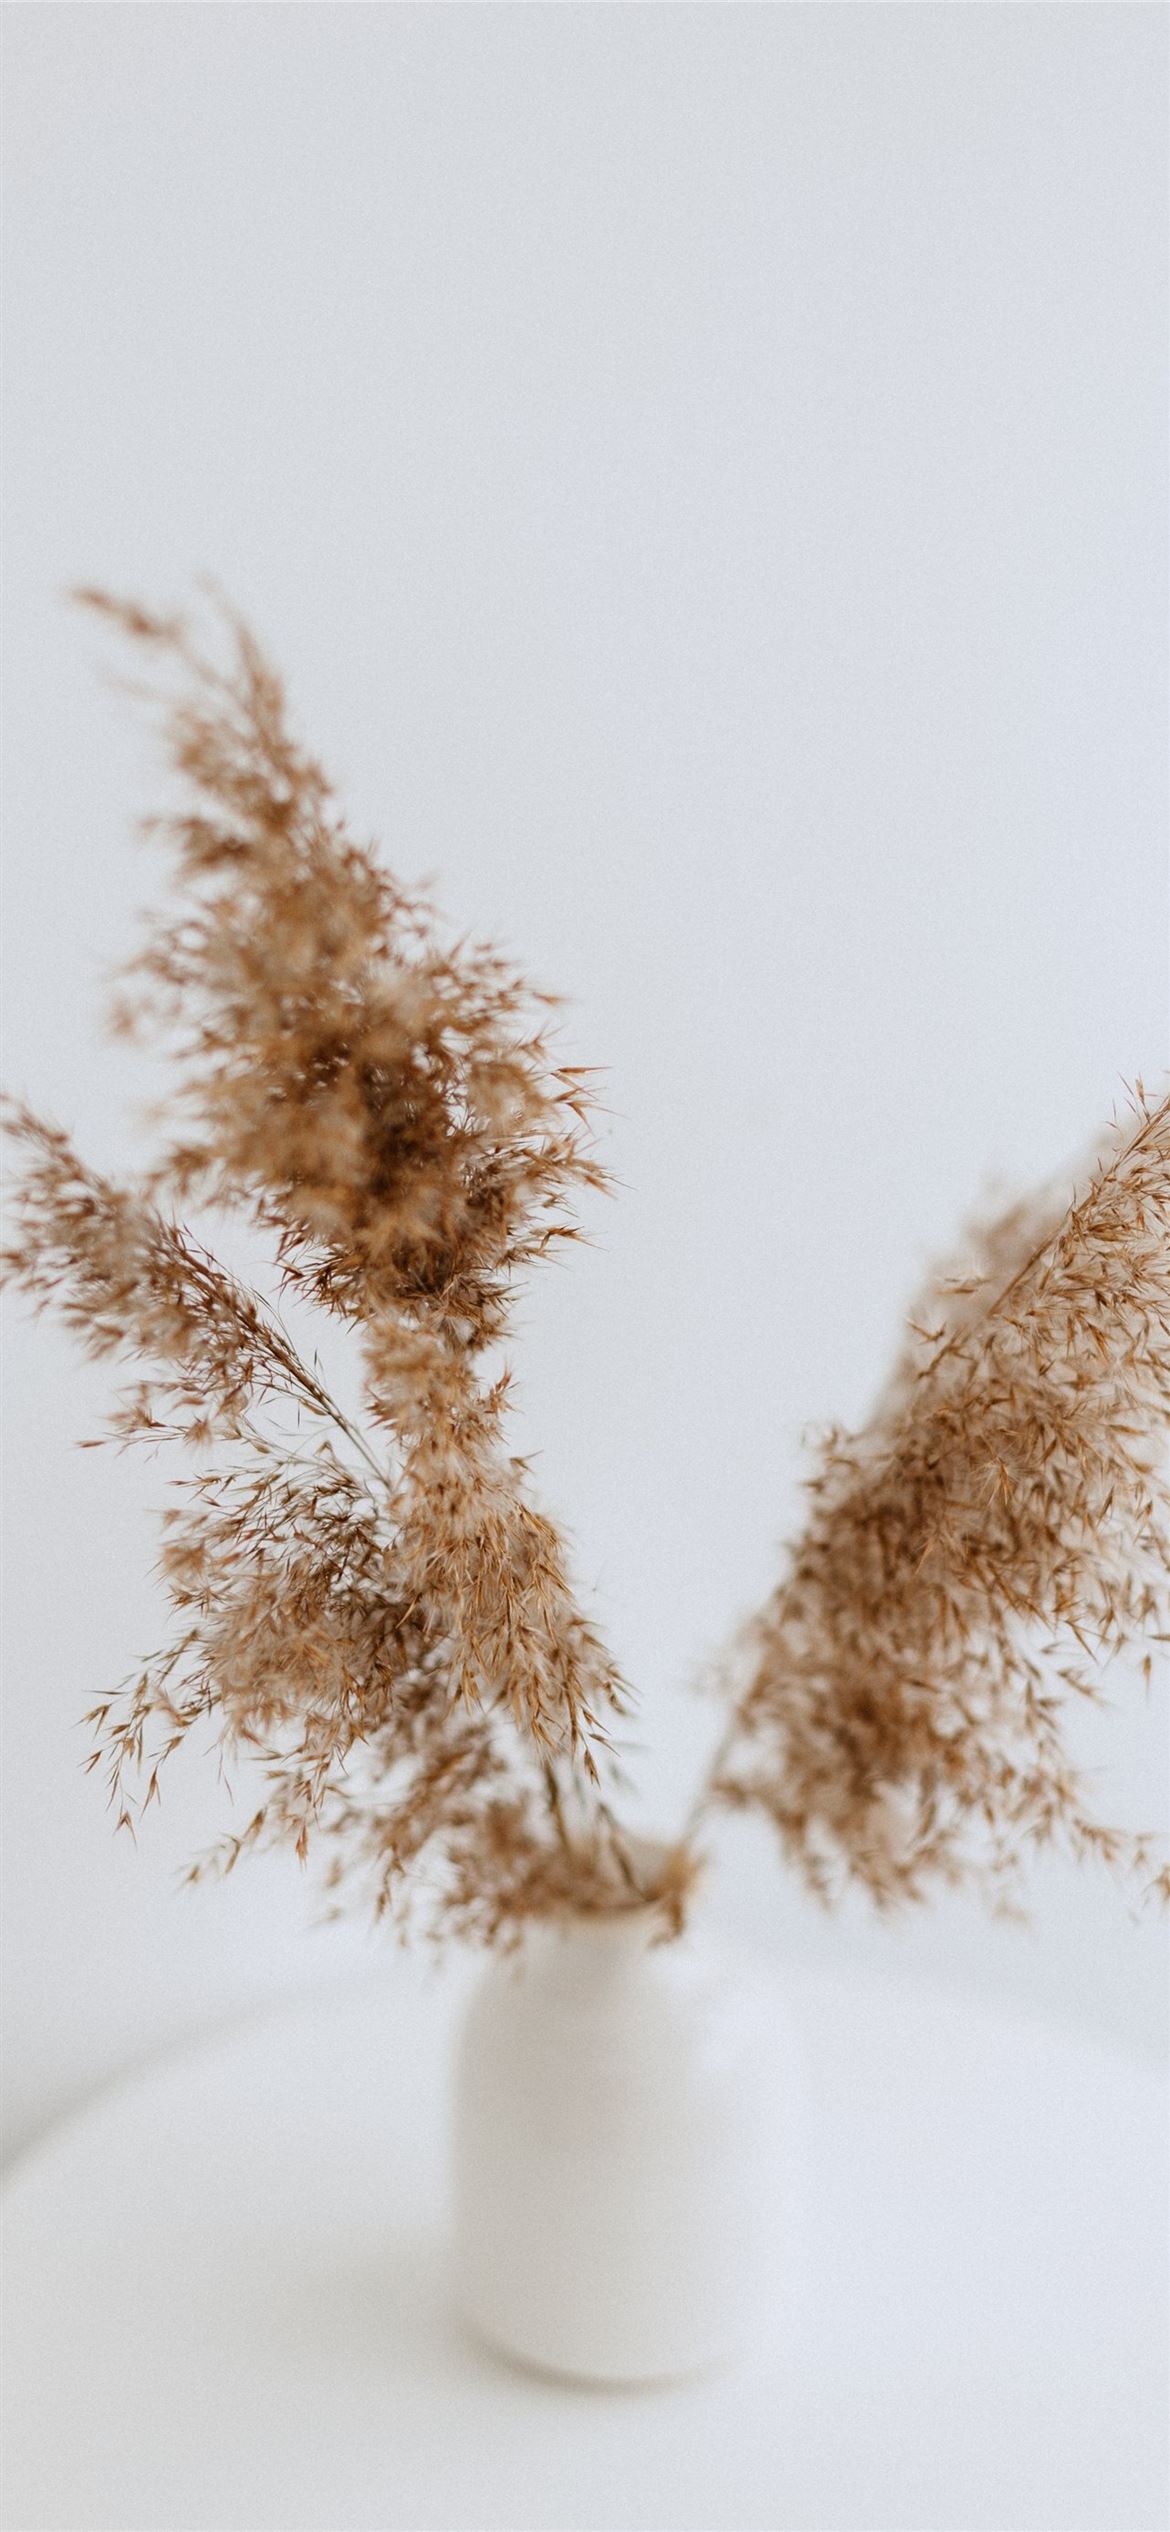 Brown Decorative Plant In White Vase iPhone Wallpaper